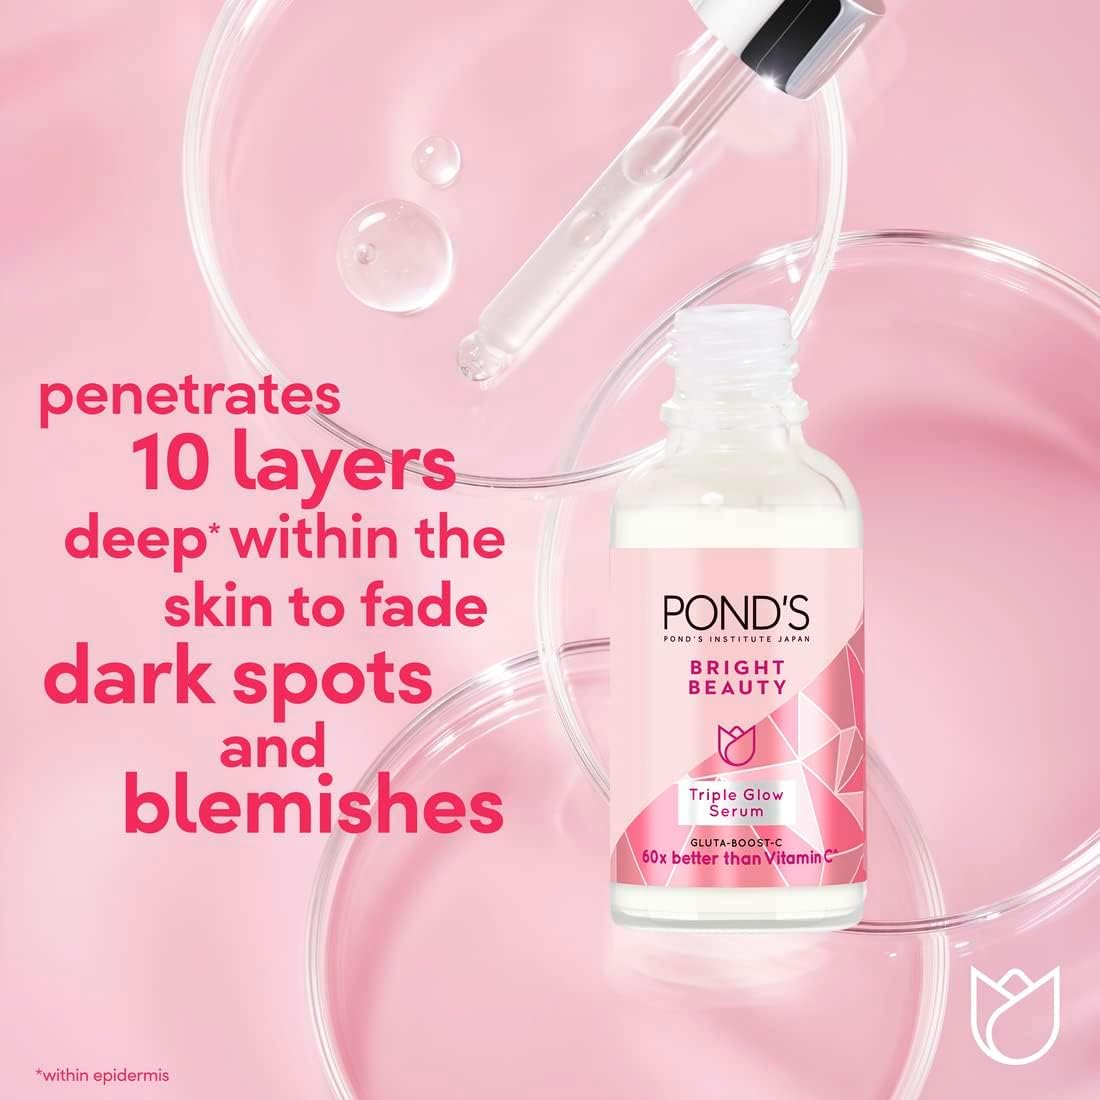 Ponds Bright Beauty Face Serum Brightens, Smoothens  Hydrates, Triple Glow Moisturizer with Niacinamide (Vitamin B3), Hyaluronic Acid and Gluta-Boost-C, 30g